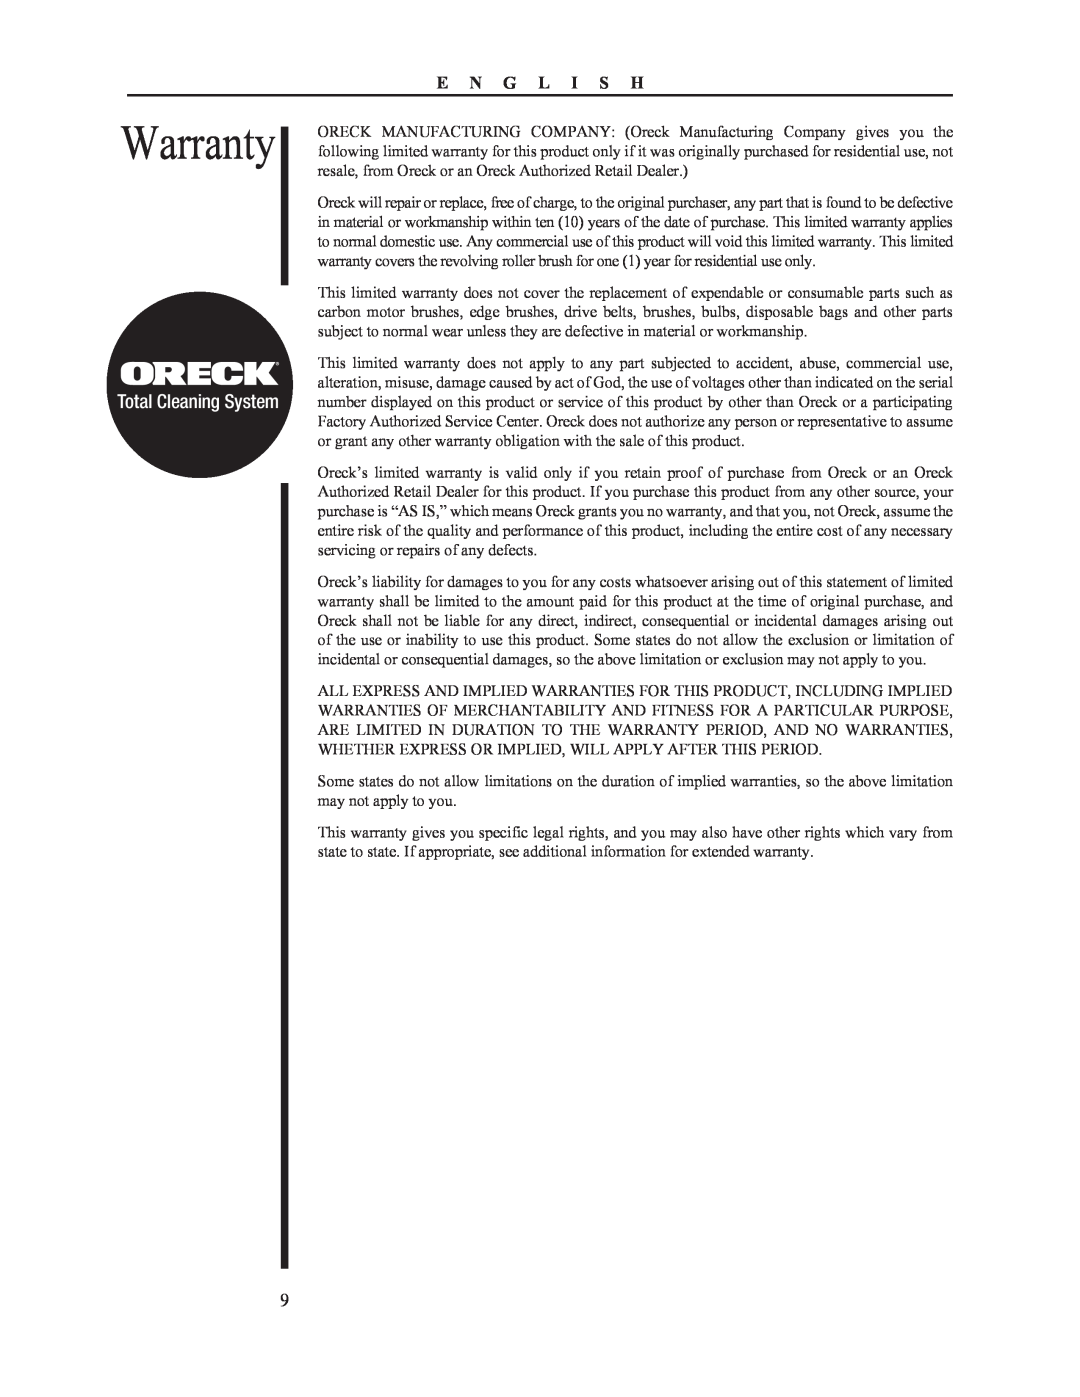 Oreck 79052-01REVA manual Warranty, Total Cleaning System, E N G L I S H 